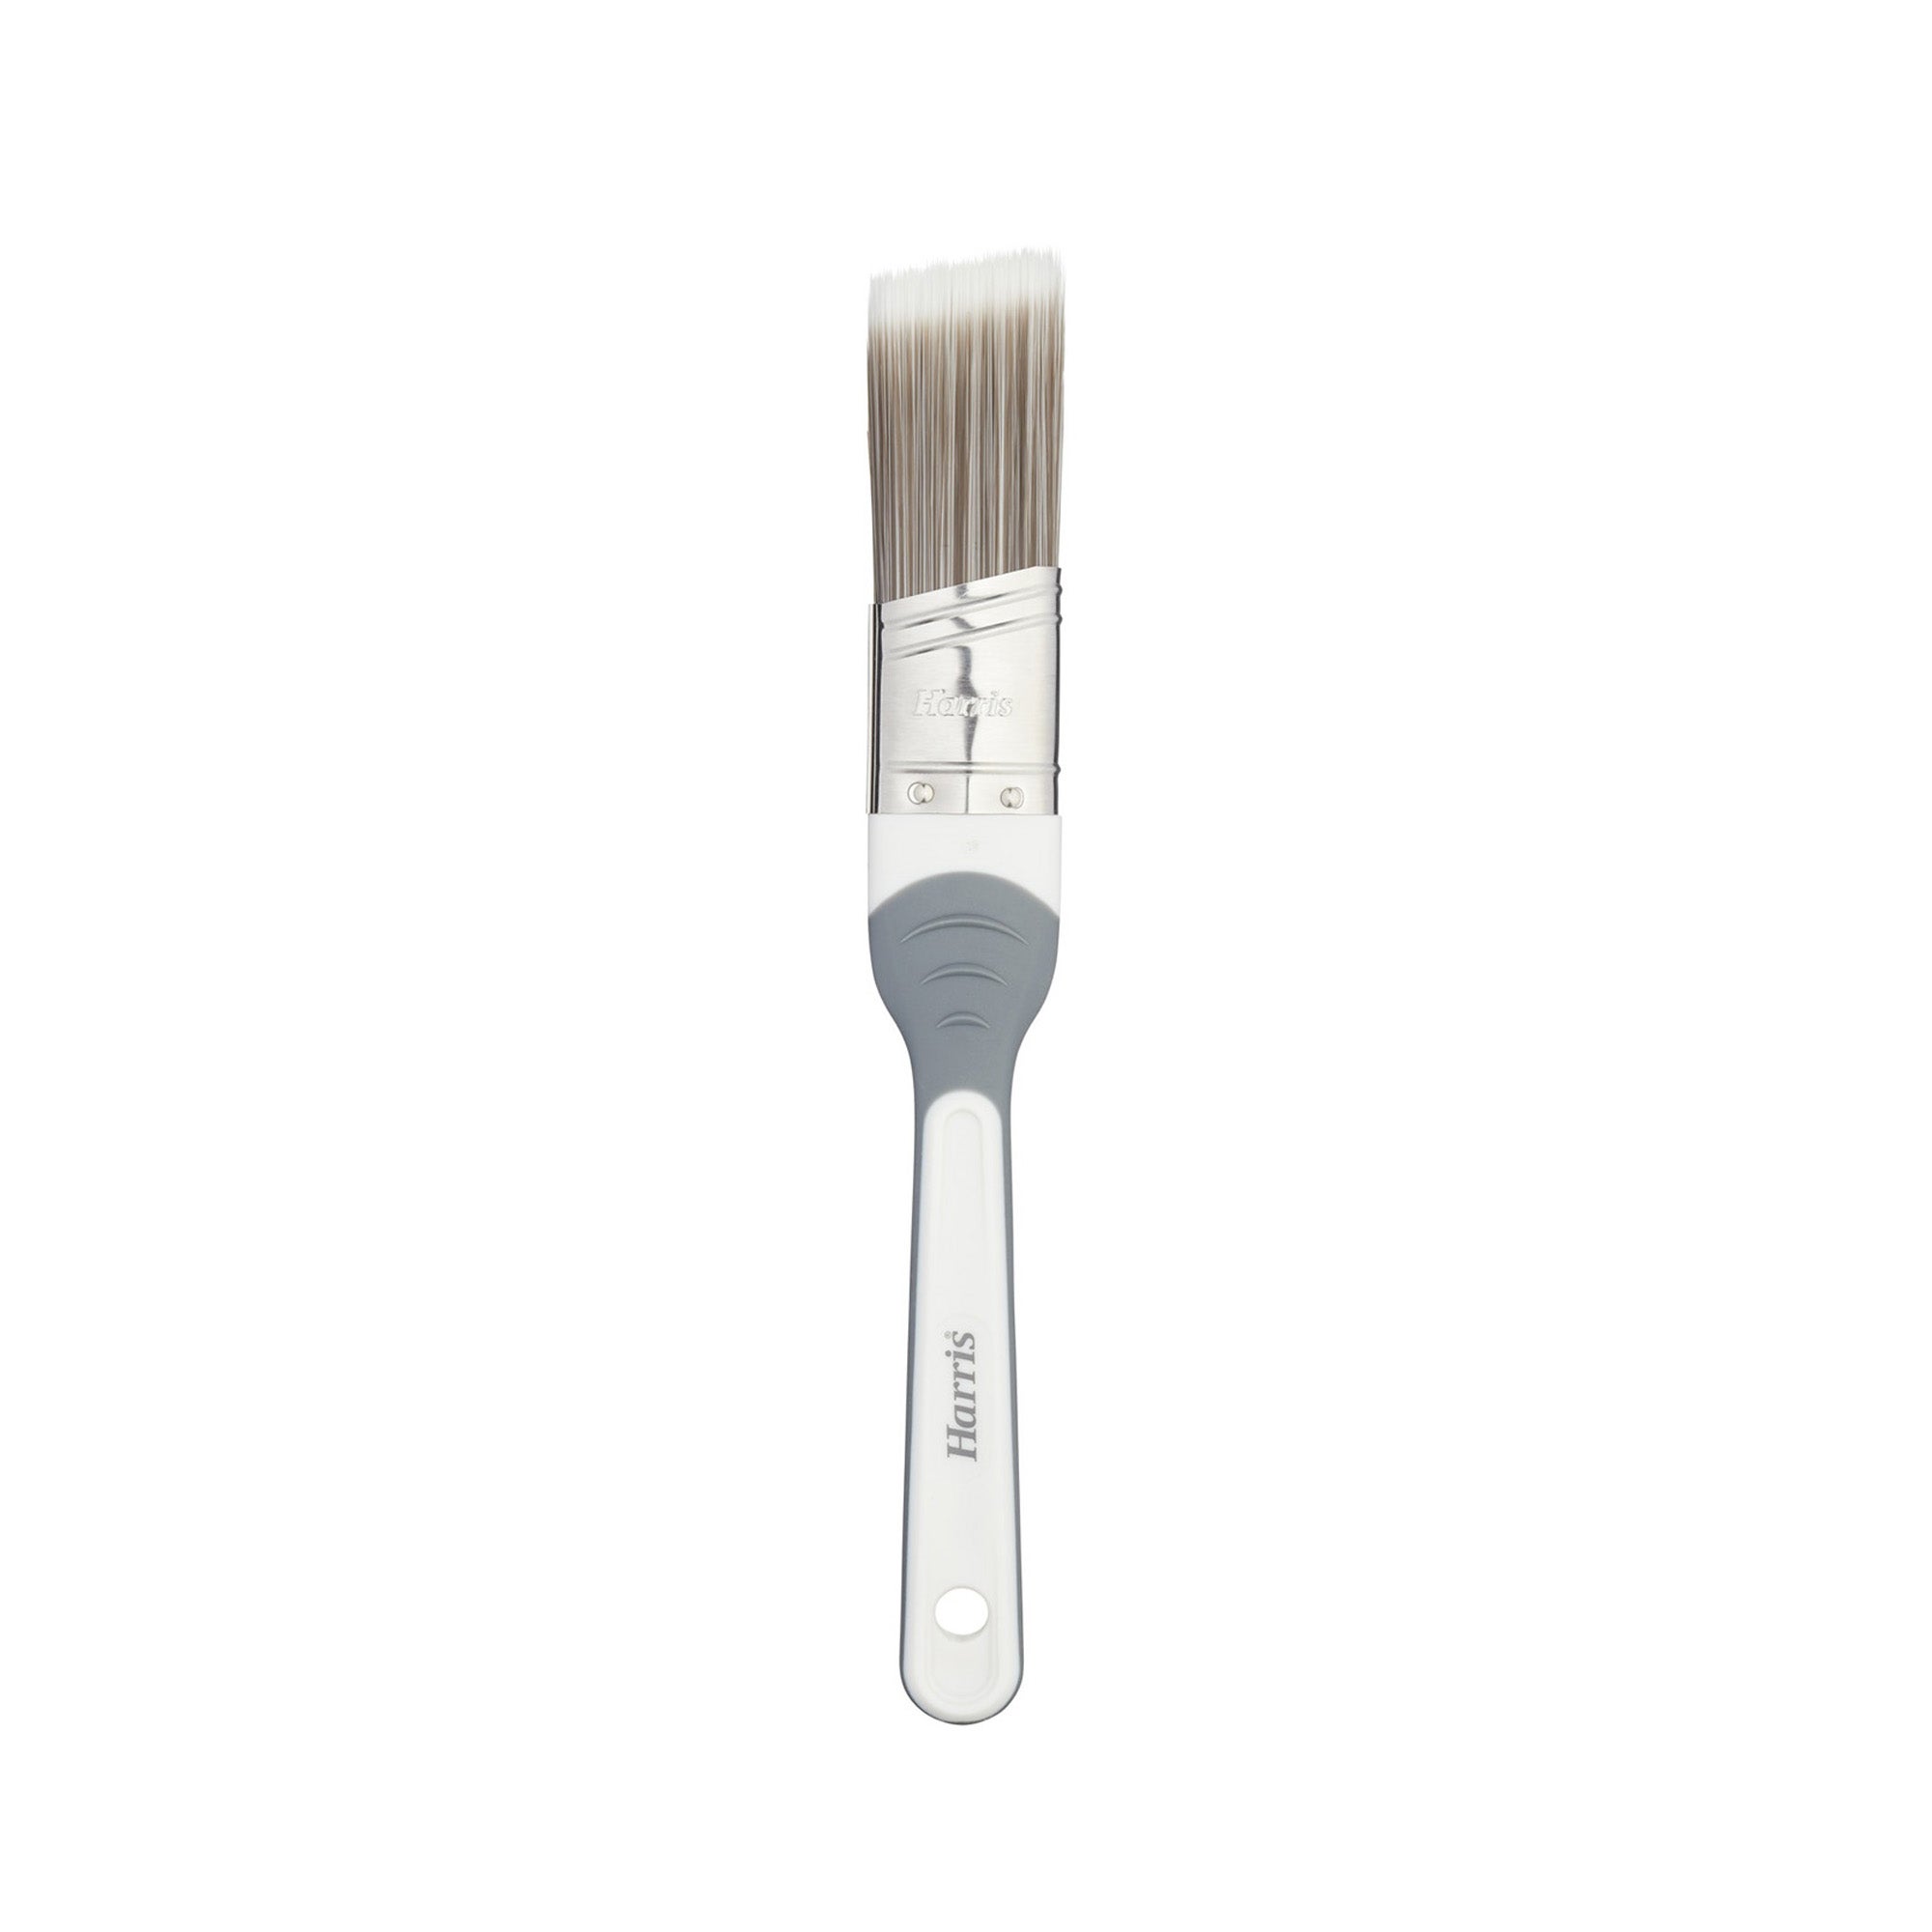 Photos - Putty Knife / Painting Tool Harris Seriously Good Walls & Ceiling Angled Brush 1inch / 25mm Grey 